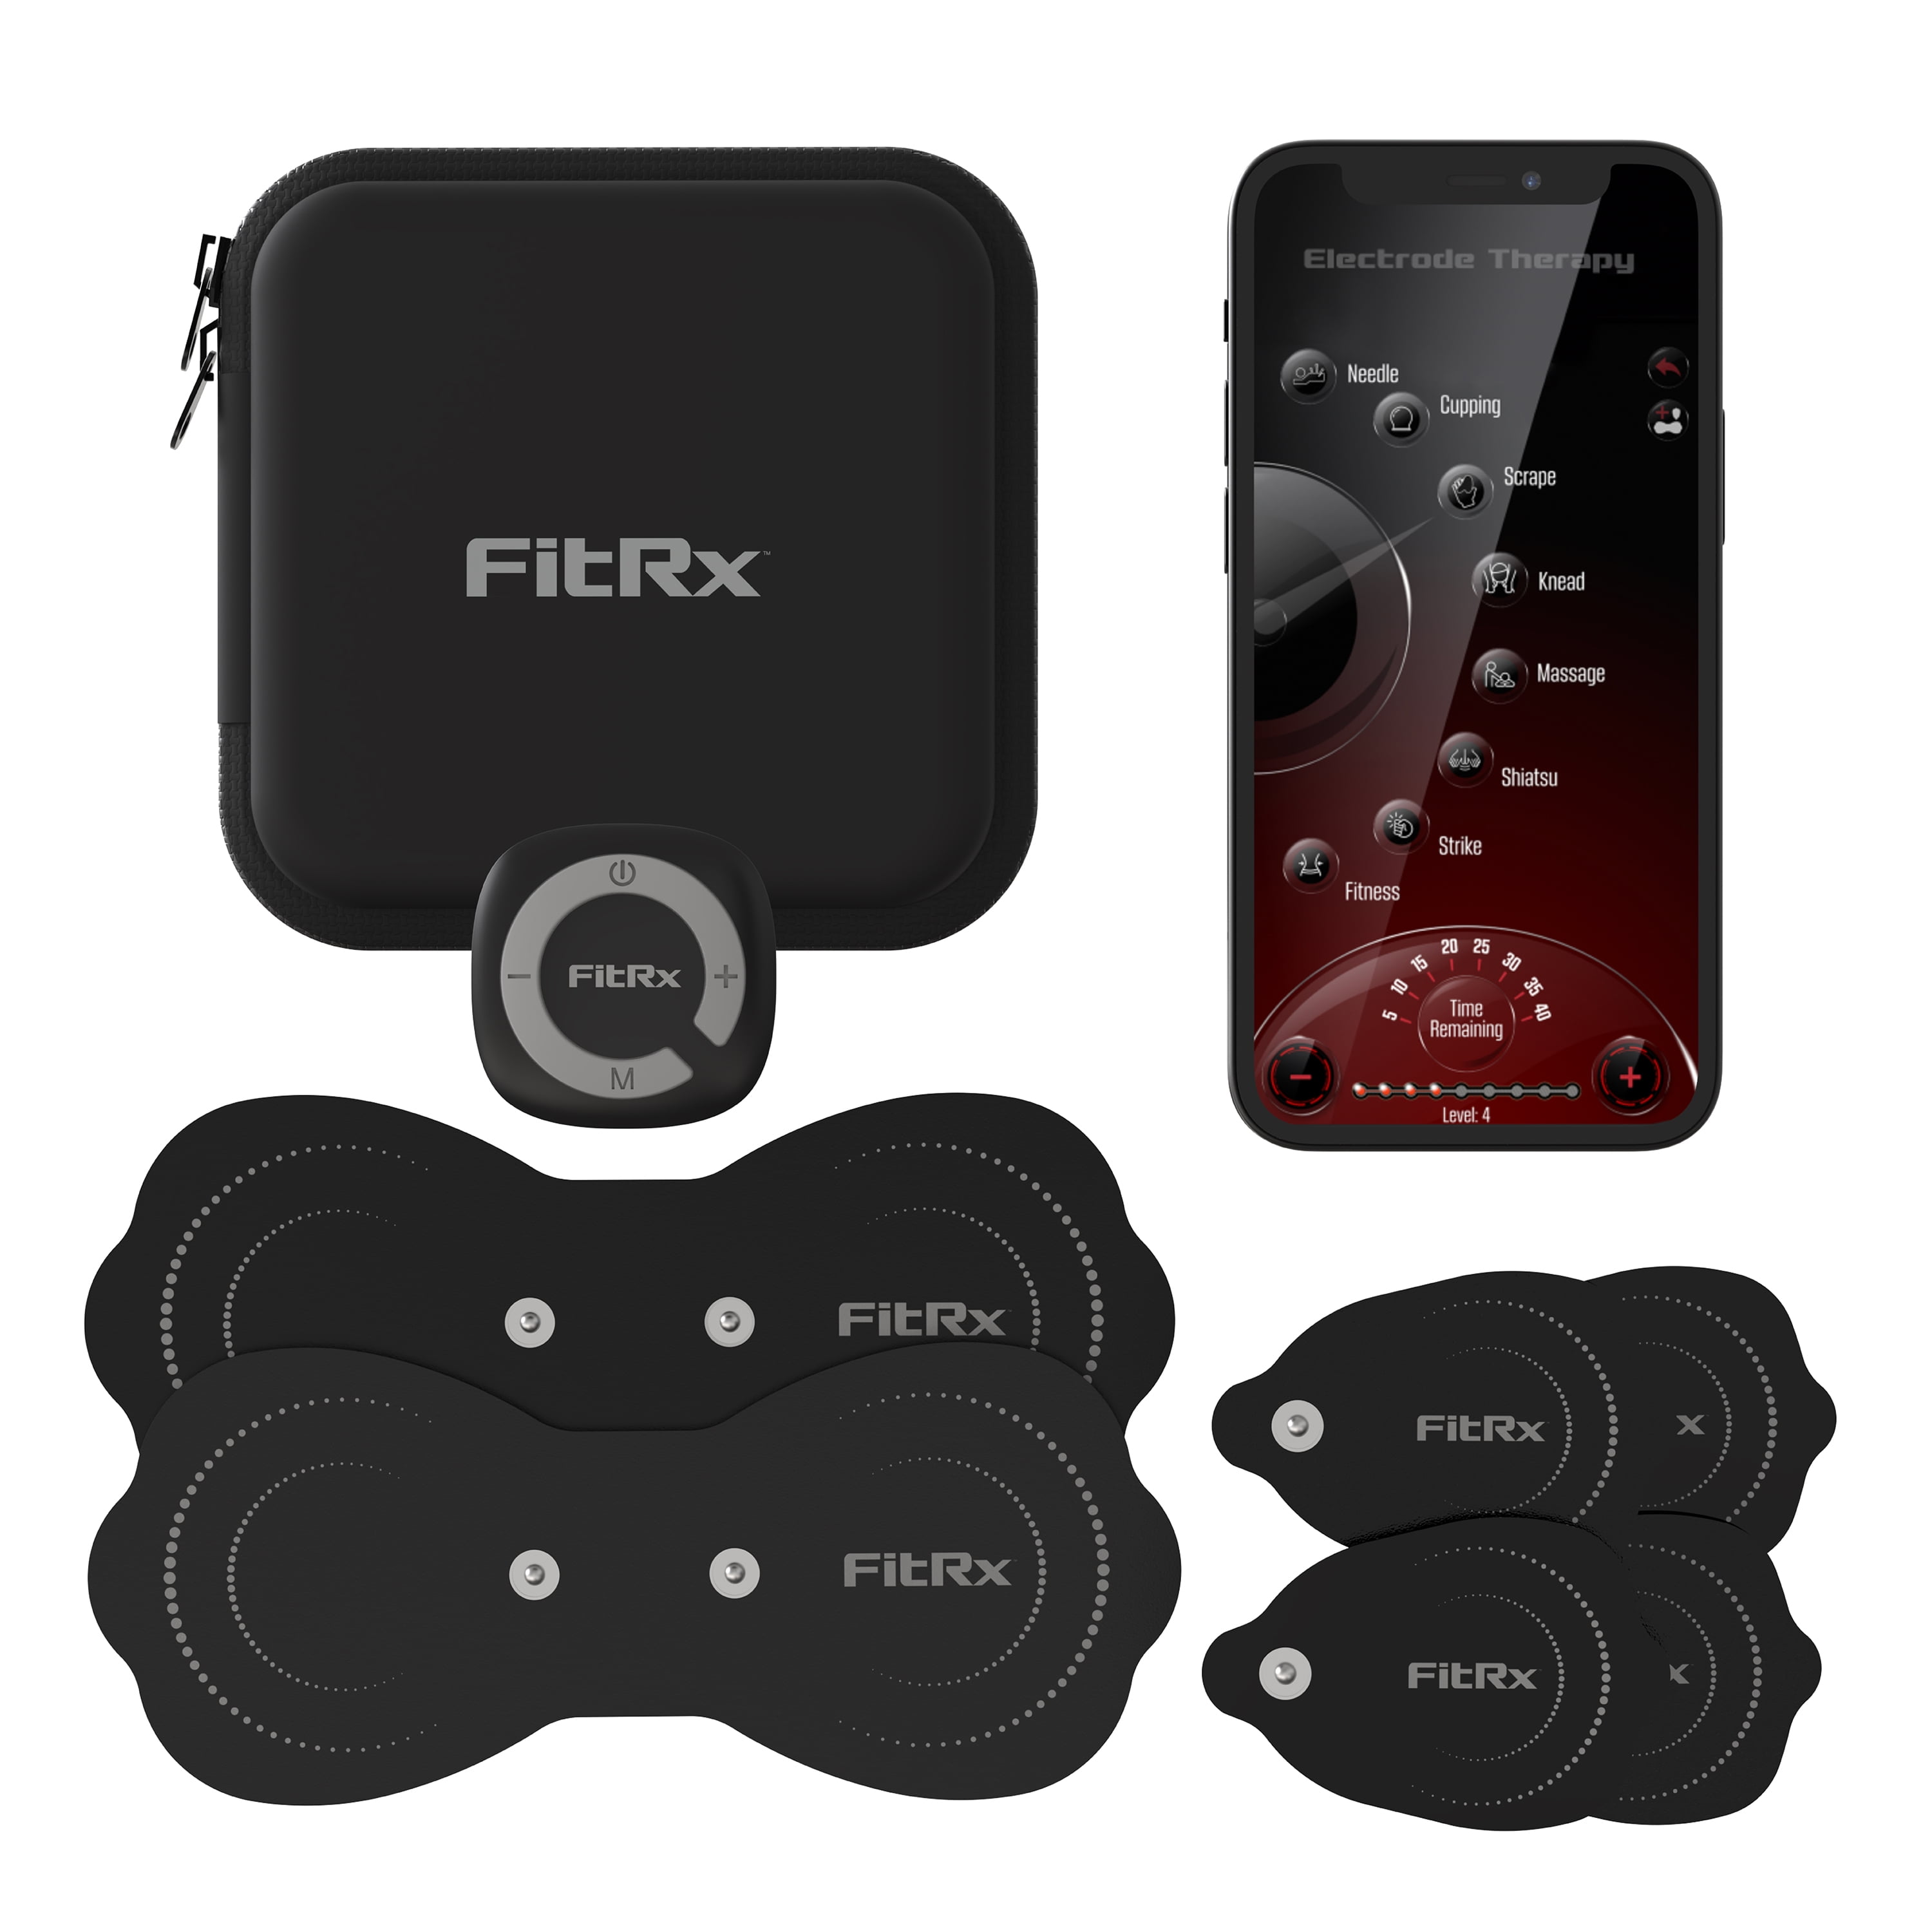 FitRx Electrode Wireless Massager - Rechargeable TENS Unit Muscle ...